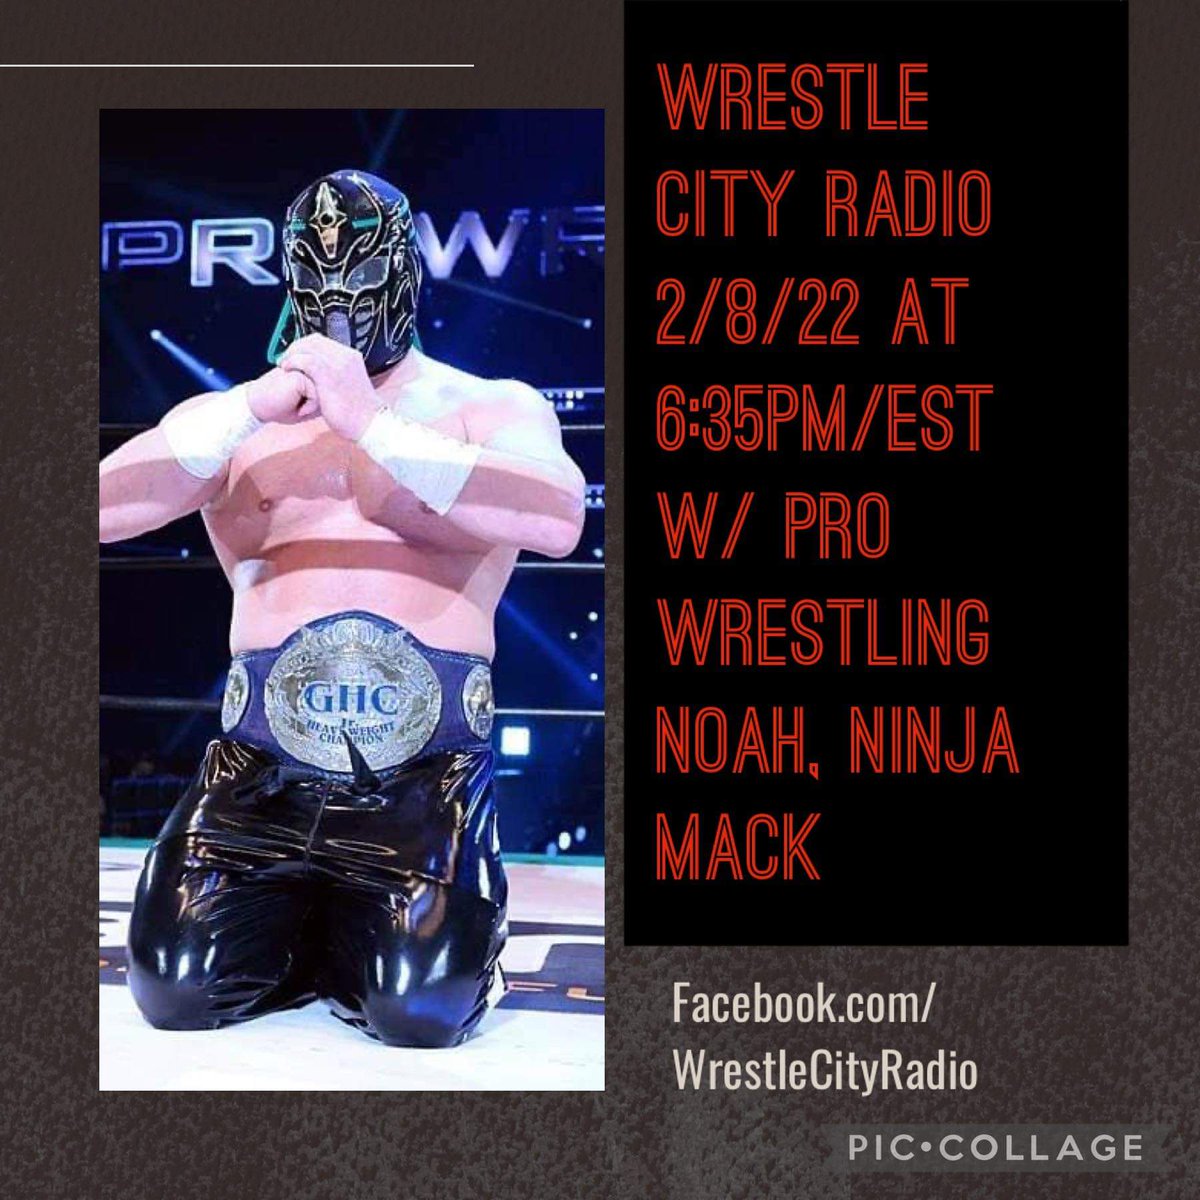 Wednesday, February 8th at 6:35pm est. I alongside my co-host of @WrestleCity will being interviewing @noahglobal wrestling star @NinjaMack1. Please join us for this special event on Facebook/Wrestle City Radio Live. Thank You in advance #NinjaMack #ProWrestlingNOAH